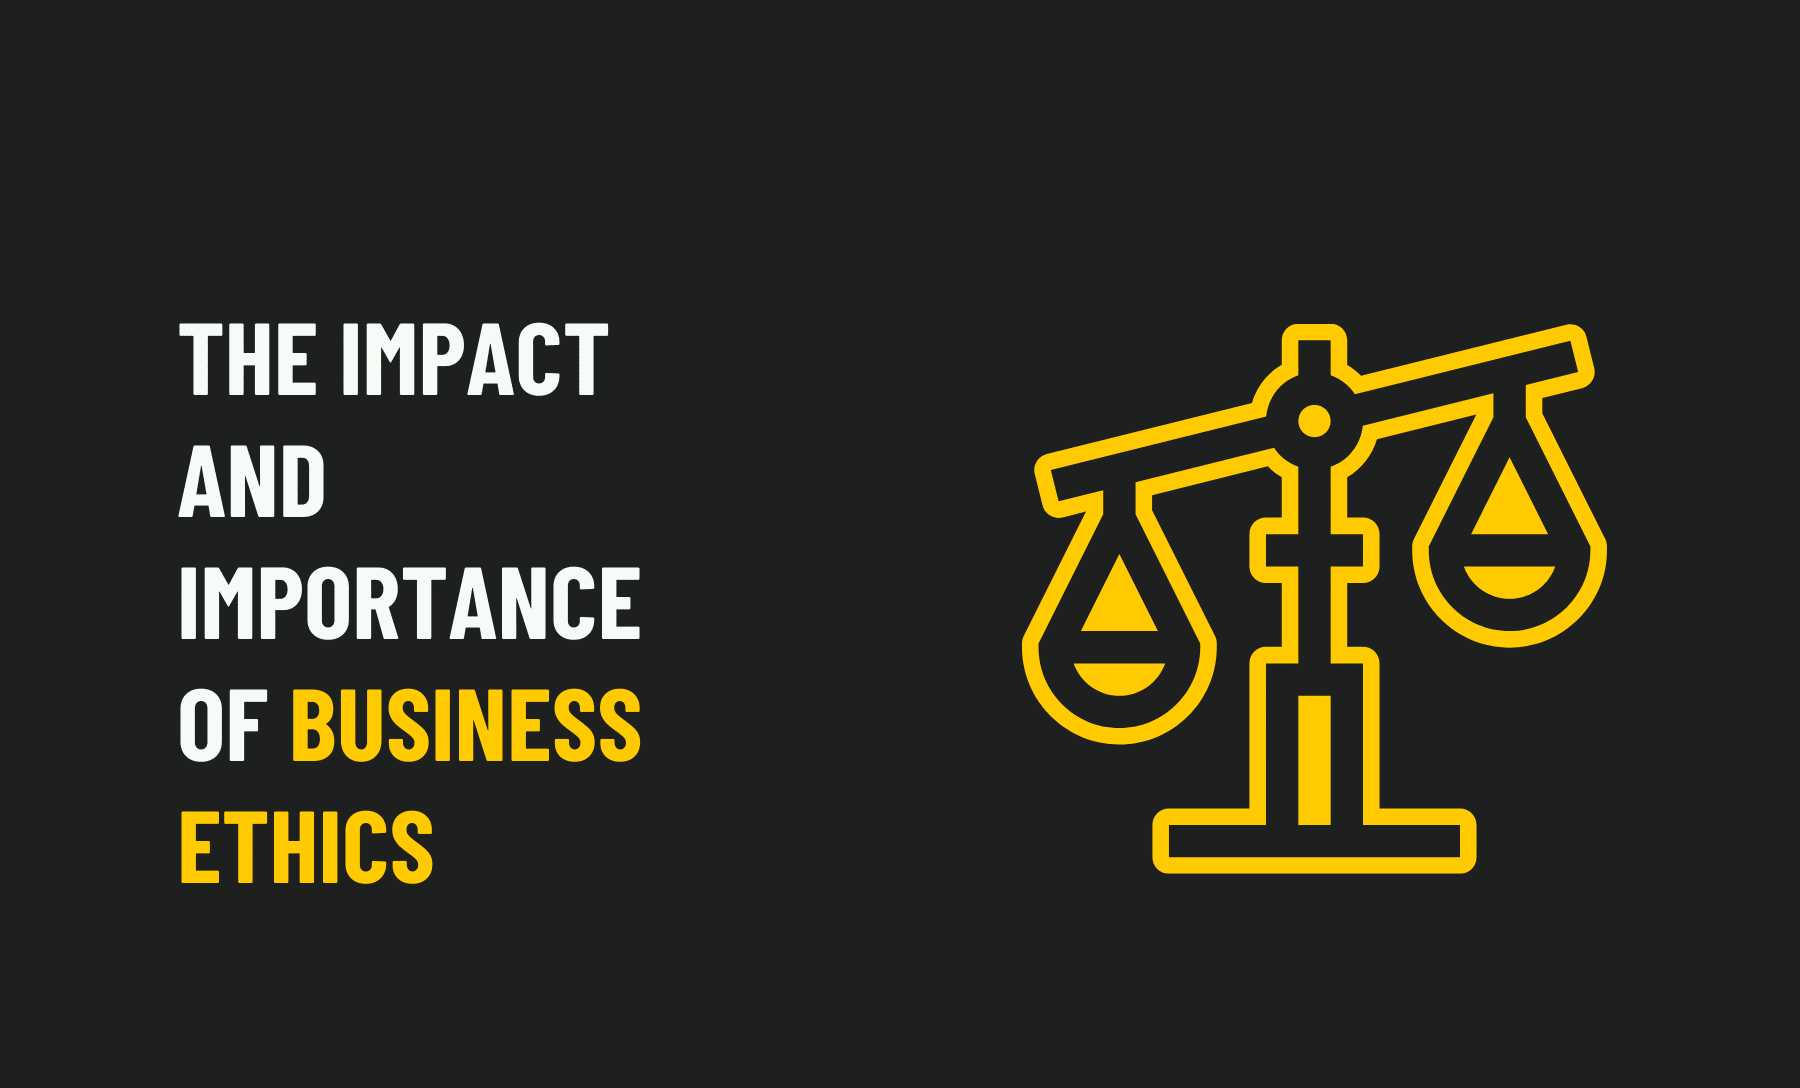 The Impact and Importance of Business Ethics